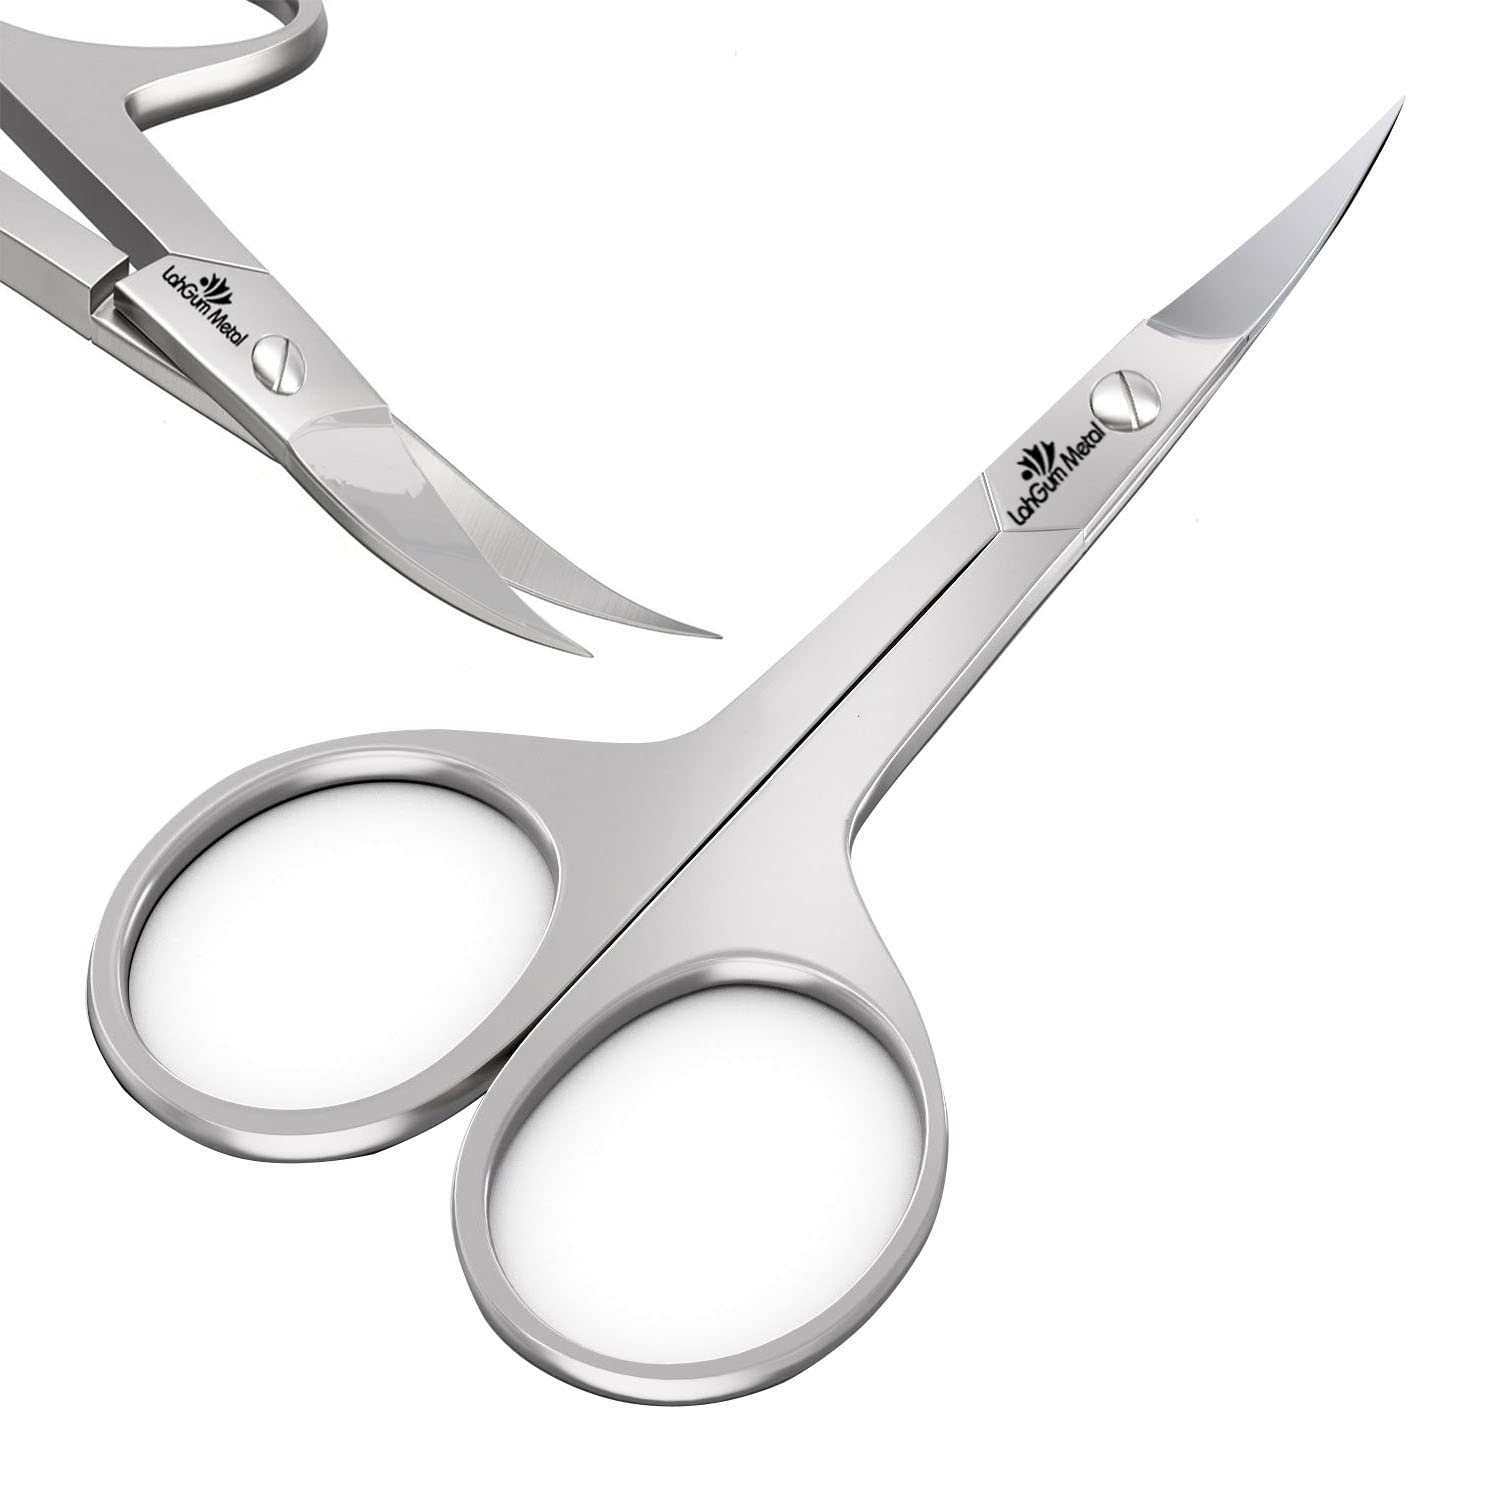 Best Pro Fingernail Cuticle Scissors Extra Fine Curved Super Russian Sharp  Thin Blade Tip For Nails Japanese Grade Stainless Steel Titanium Trim